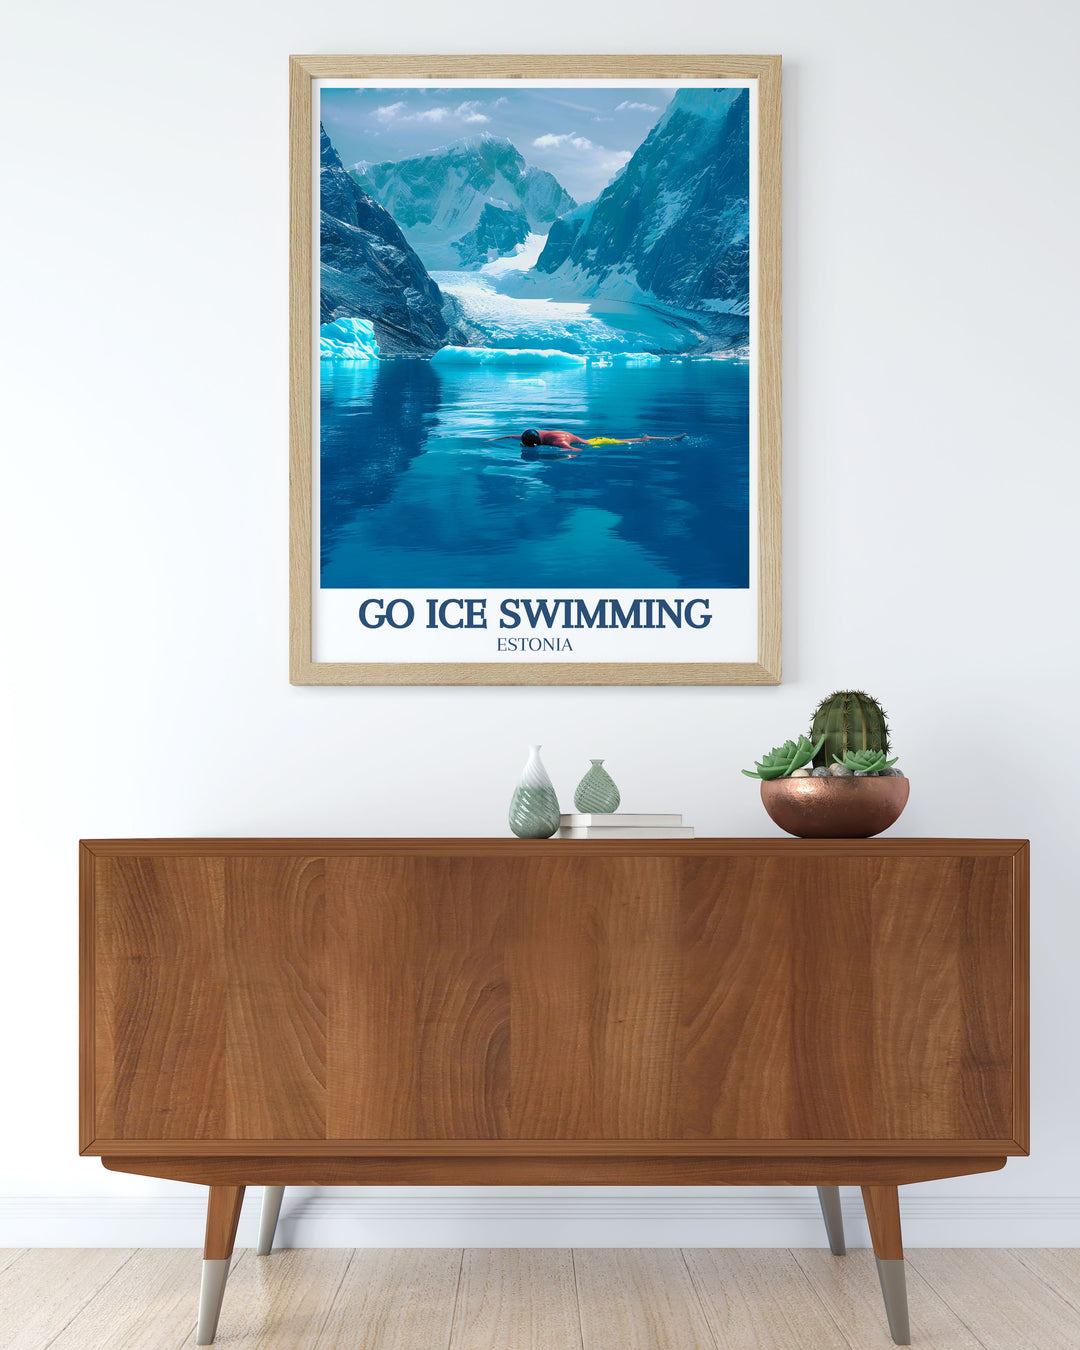 Framed art print of the Ross Ice Shelf, capturing the essence of ice swimming and the breathtaking scenery of Antarctica, a great addition for adventurers and nature lovers.